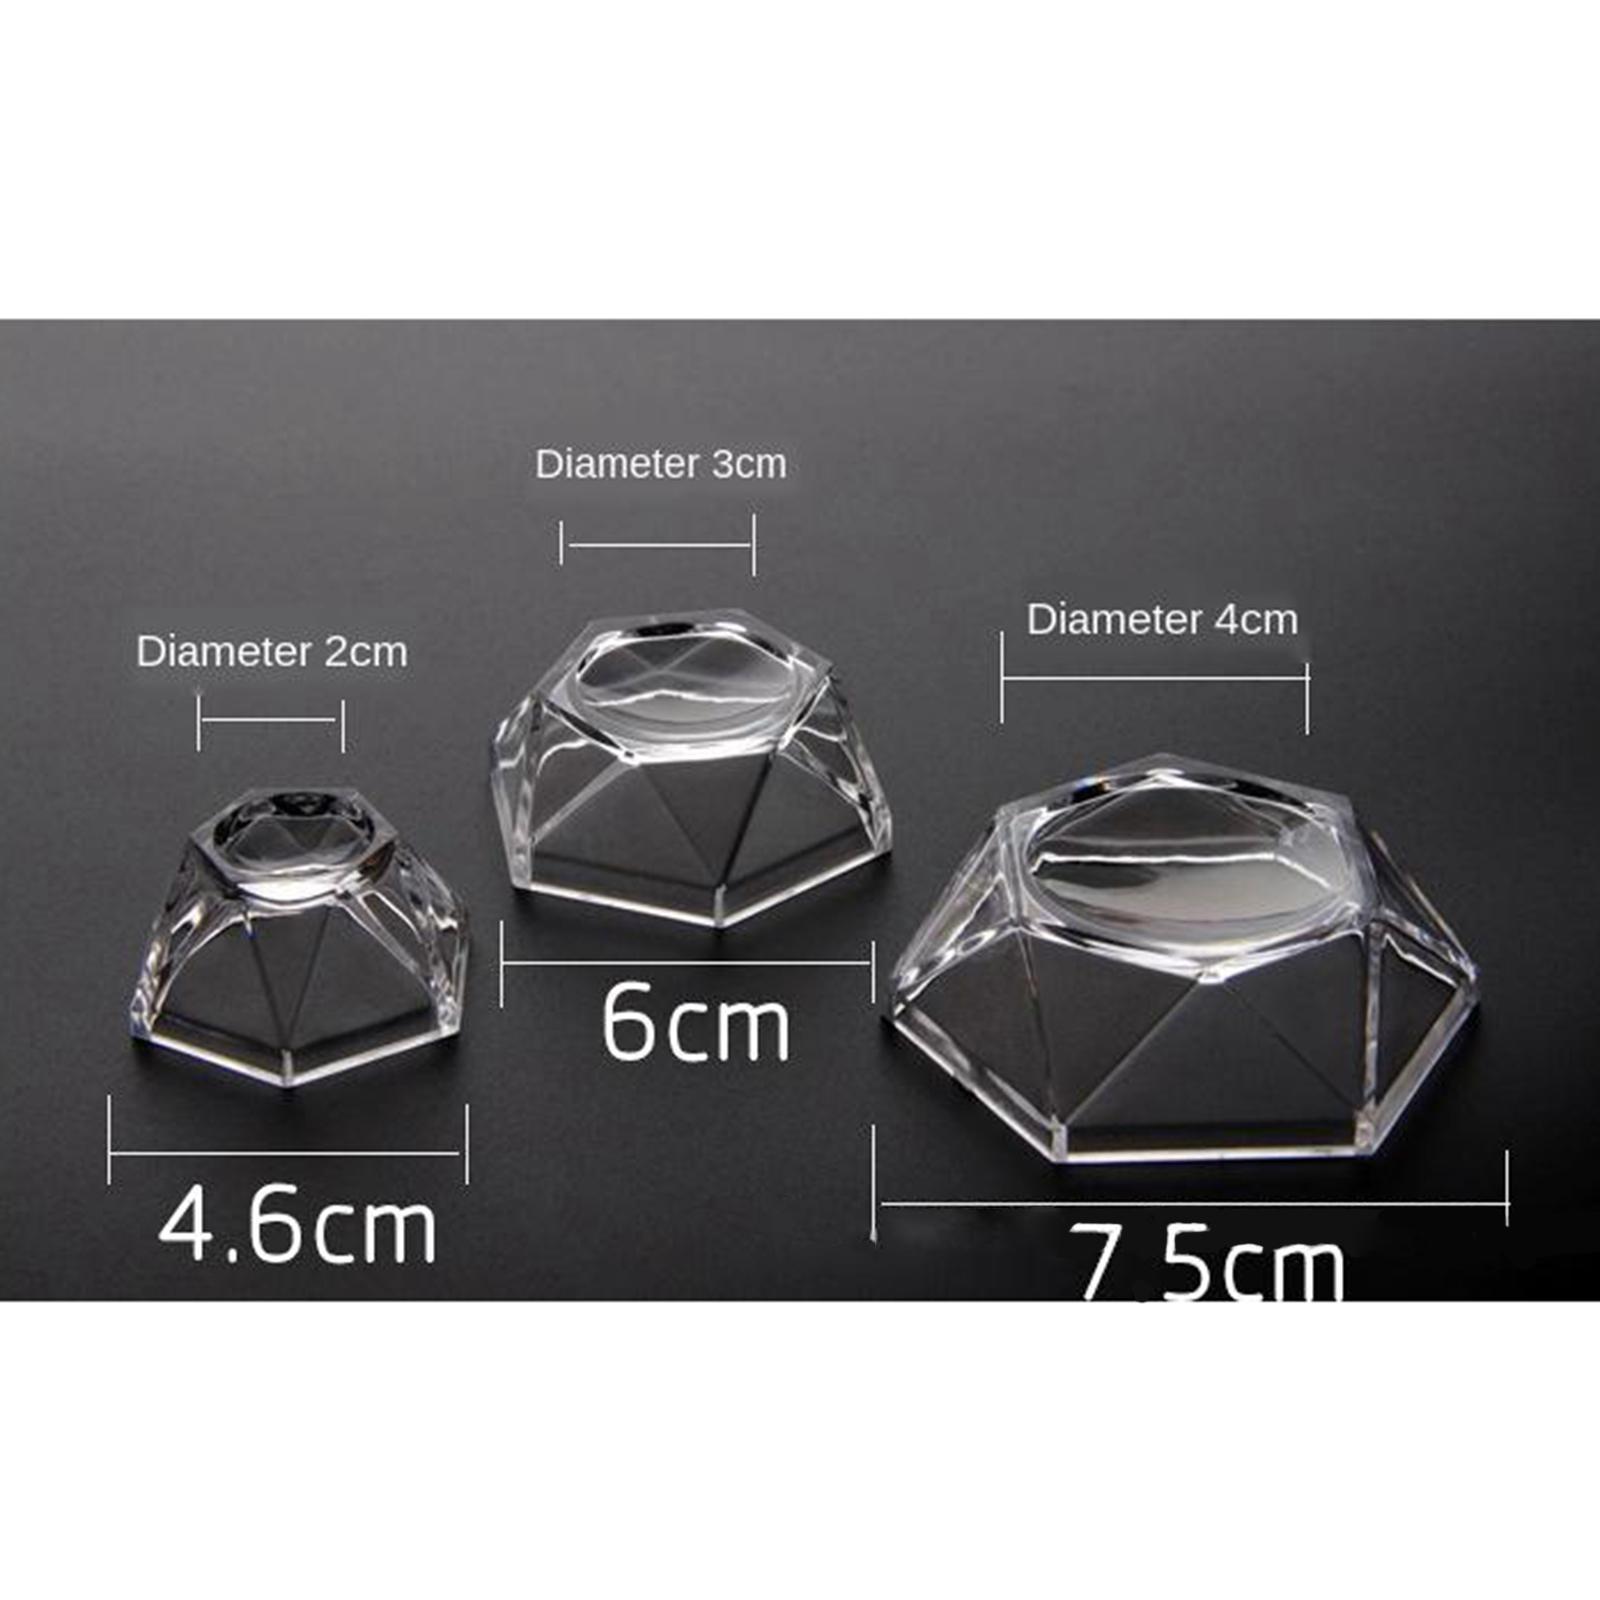 2x Acrylic Clear Display Stand Holder Base For Crystal Ball Transparent